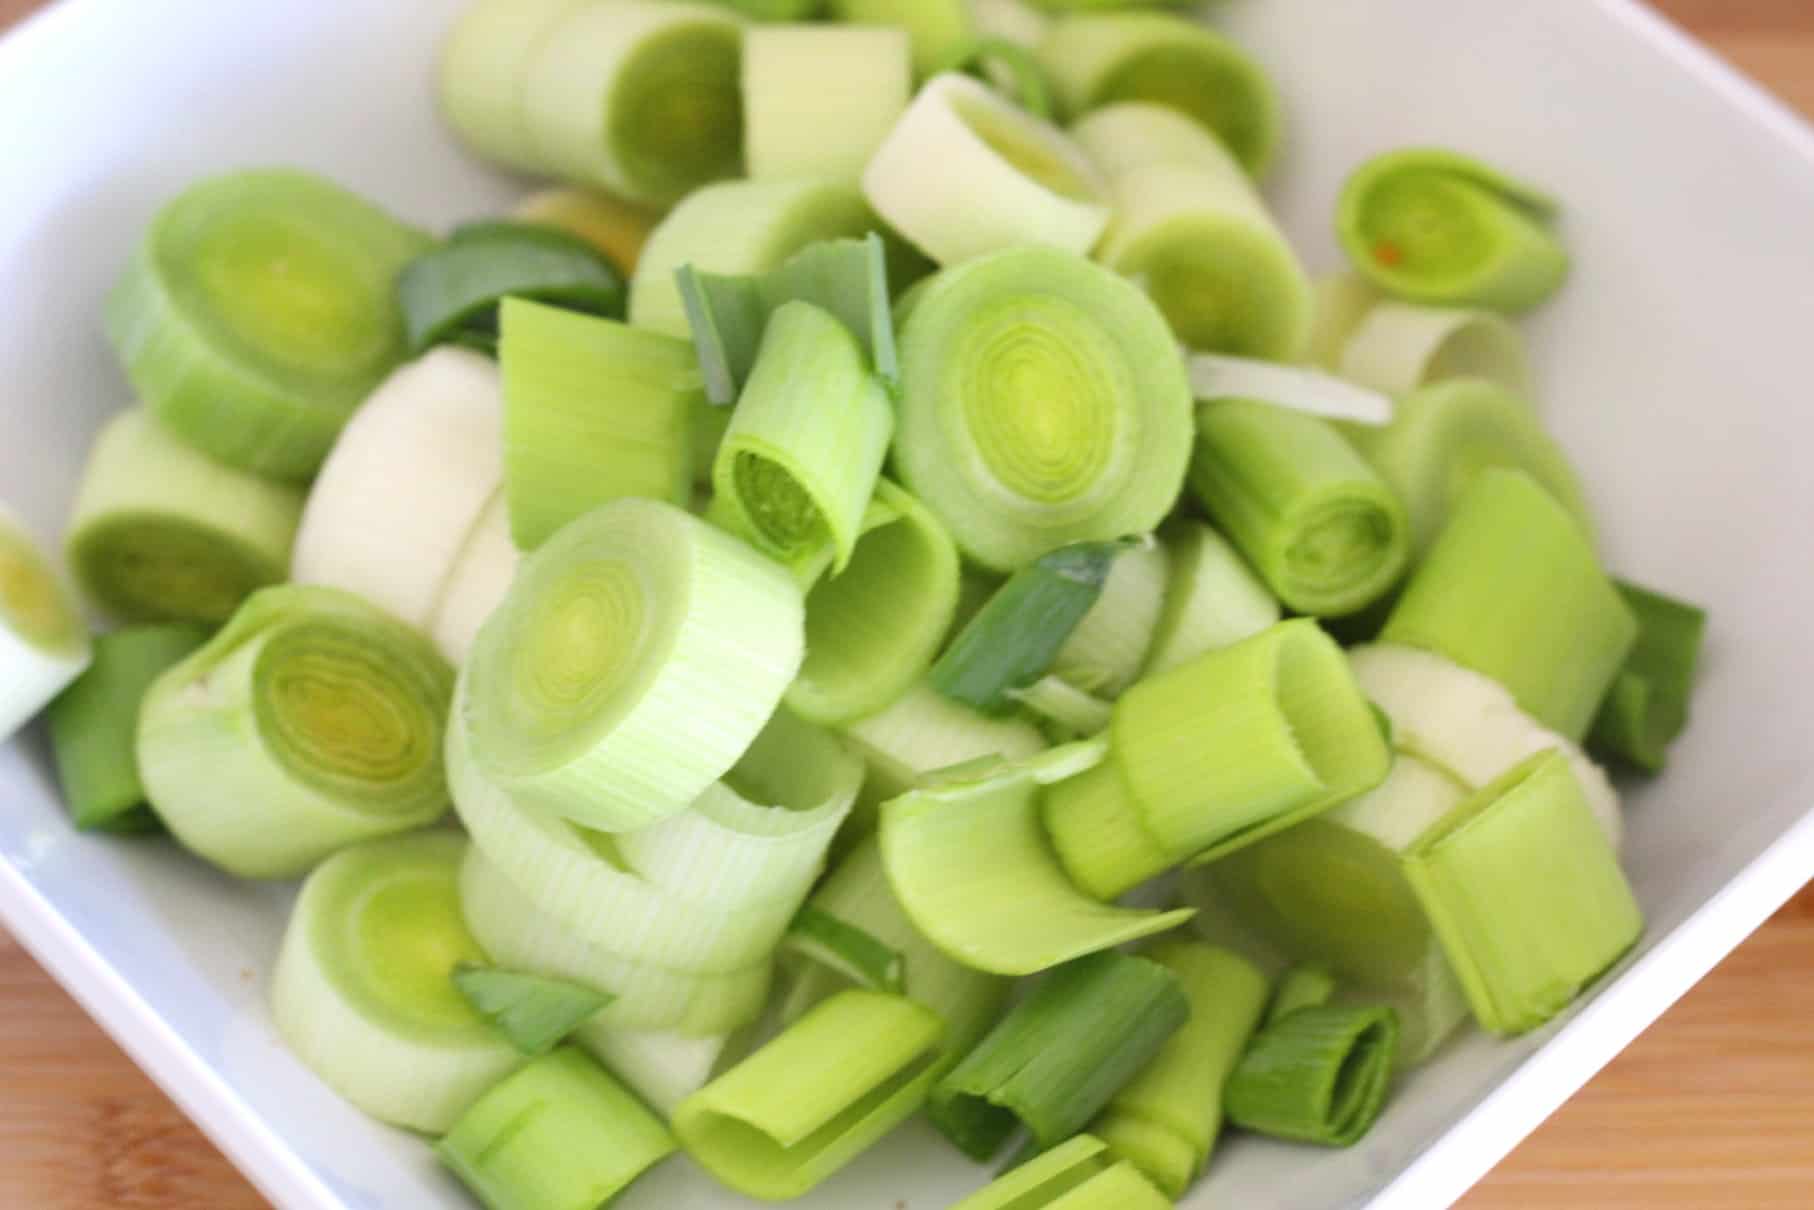 A container with chopped leeks in round shapes, like medallions.